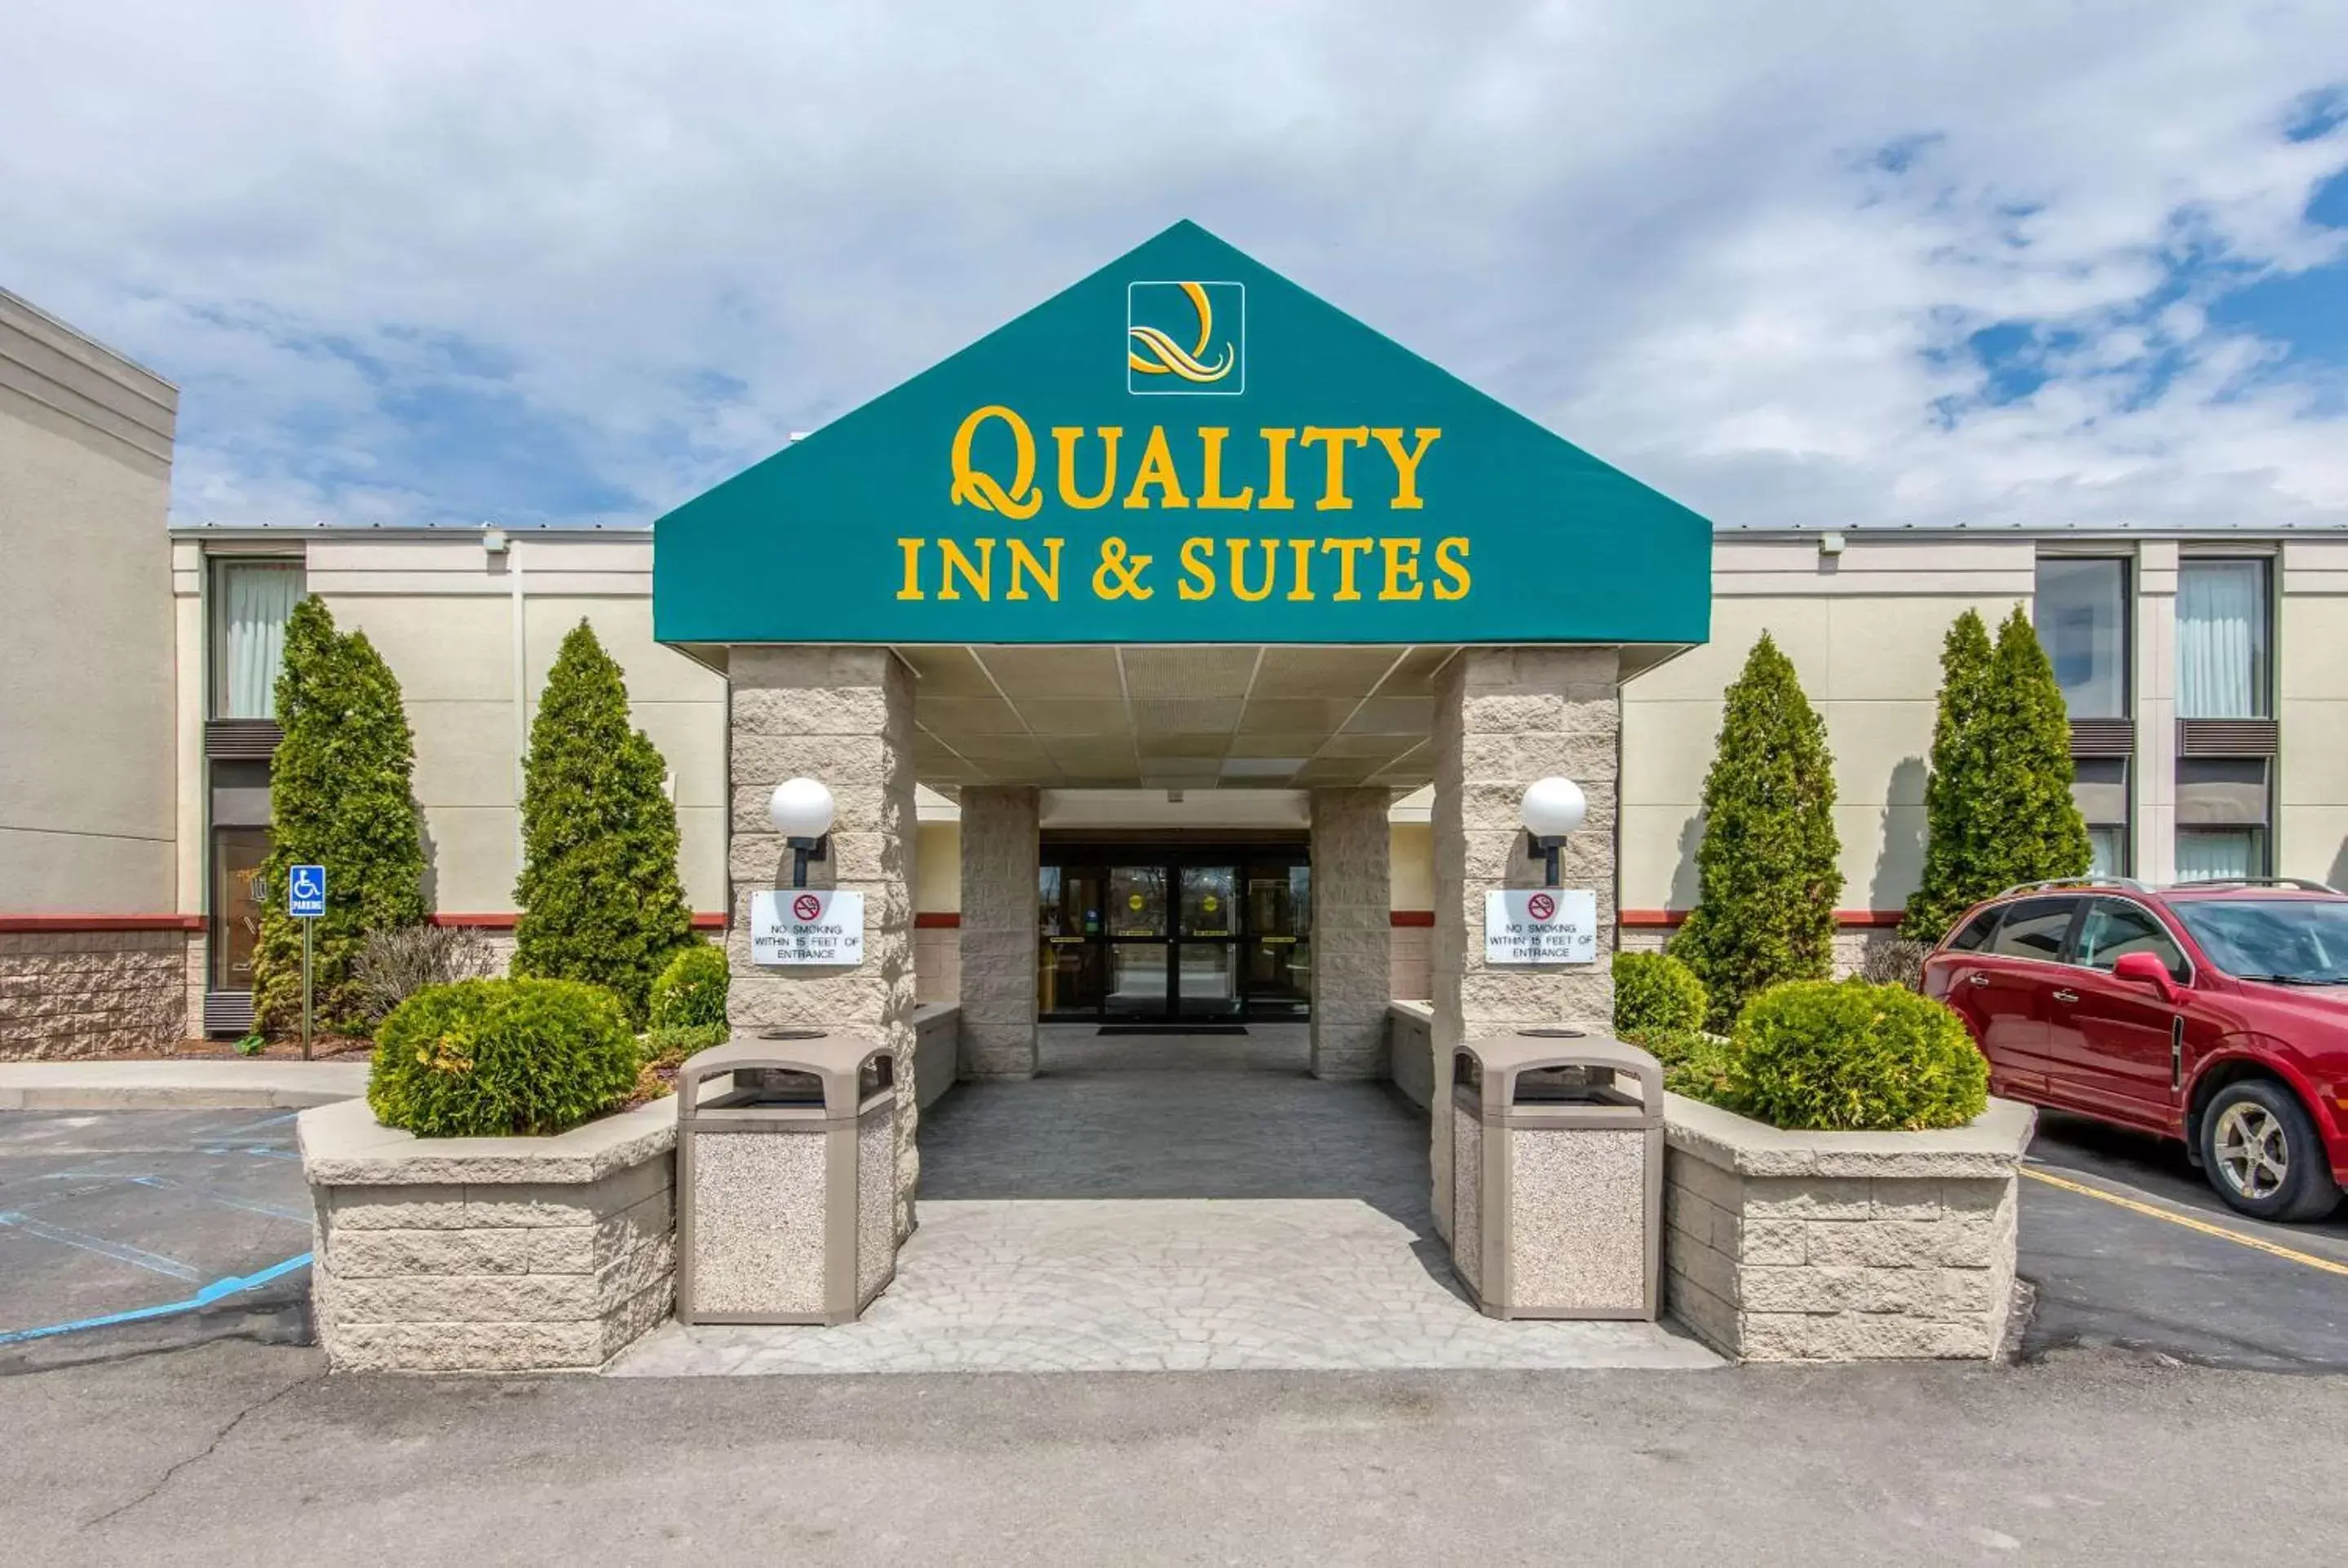 Property building in Quality Inn & Suites Mansfield